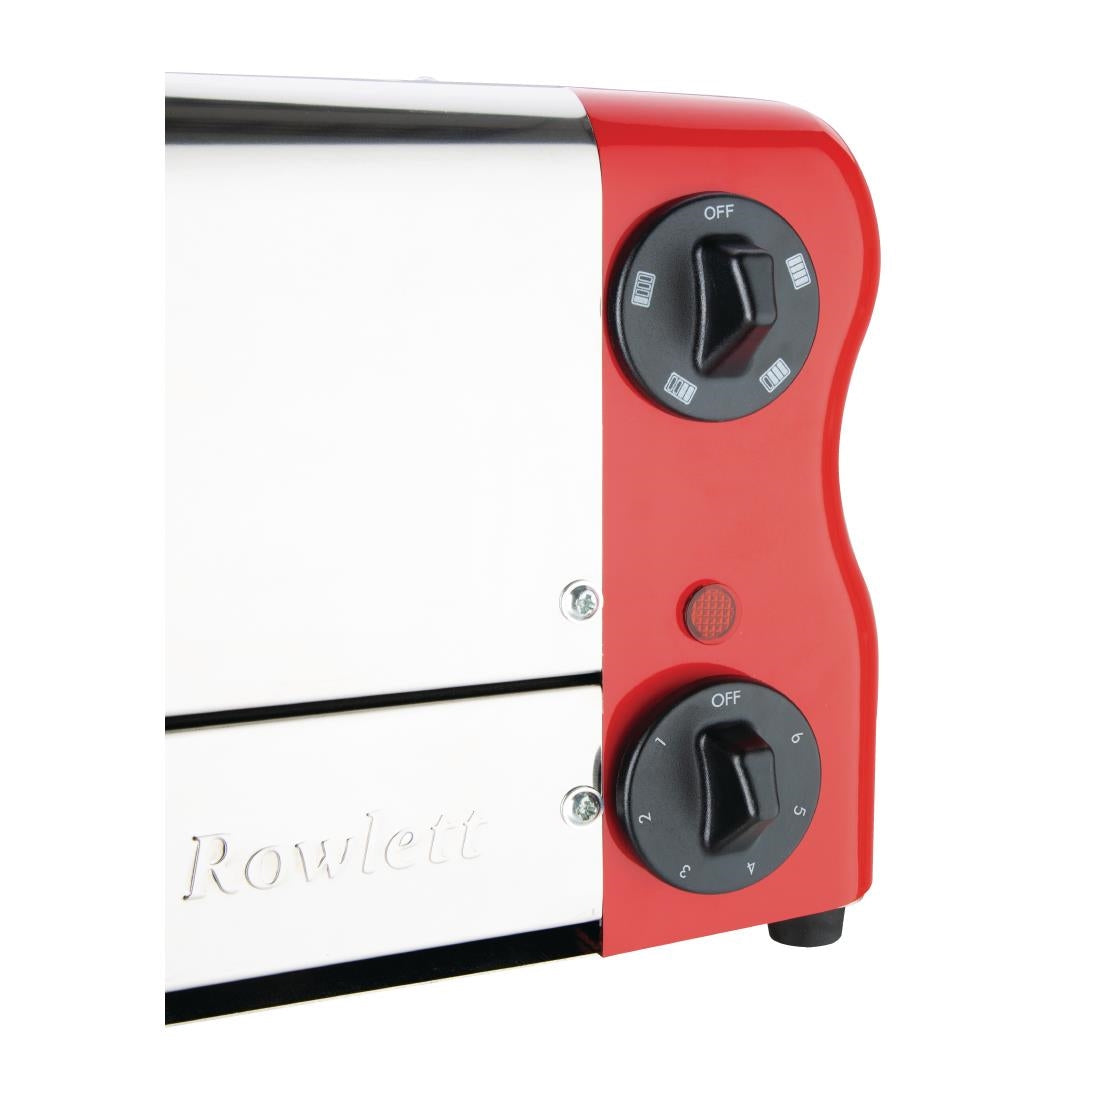 CH184 Rowlett Esprit 4 Slot Toaster Traffic Red w/2x Additional Elements & Sandwich Cage JD Catering Equipment Solutions Ltd